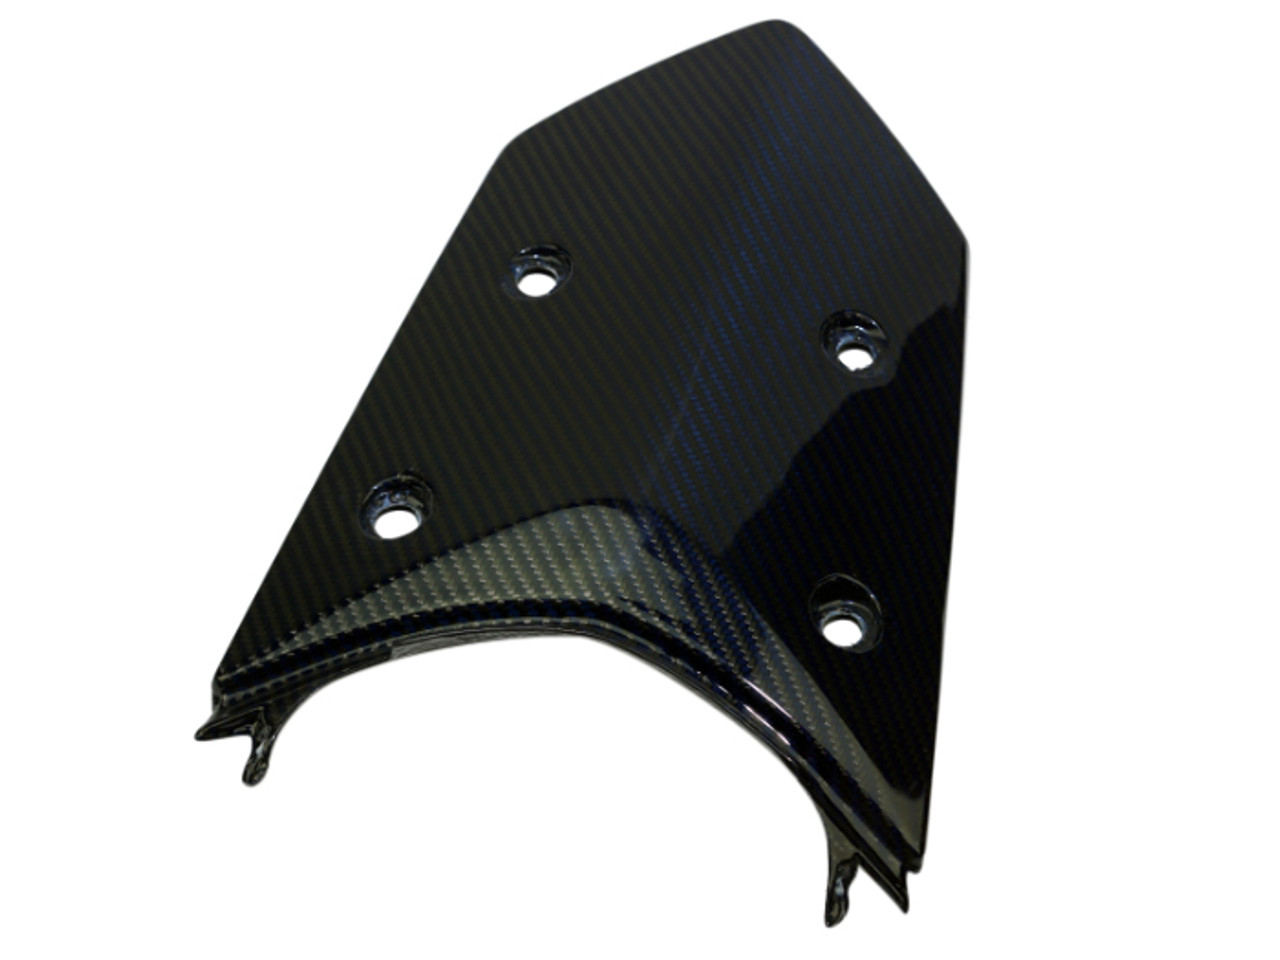 Rear Tail Fairing in Black and Blue Glossy Twill Weave Carbon Fiber for KTM 1290 Super Adventure, 1190 Adventure